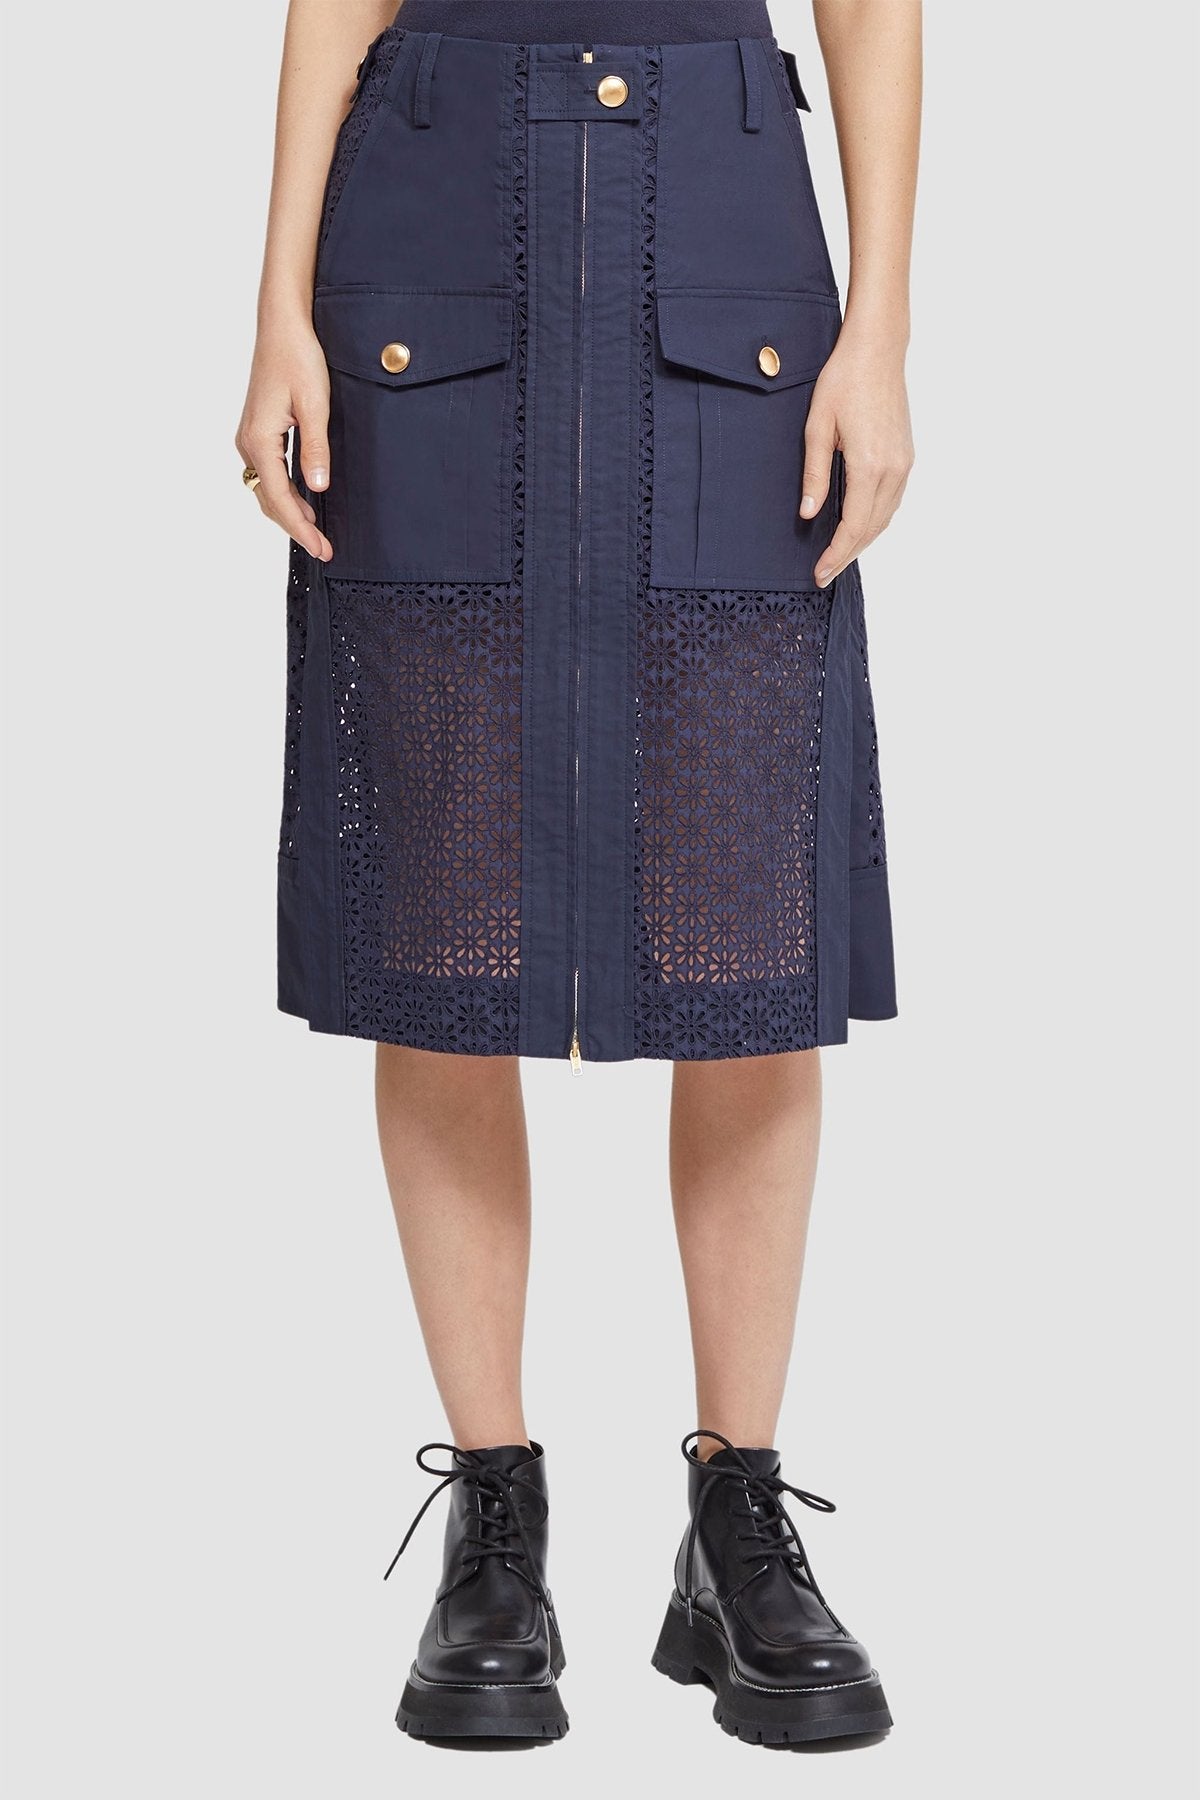 Broderie Anglaise Utility Skirt in Midnight - shop-olivia.com